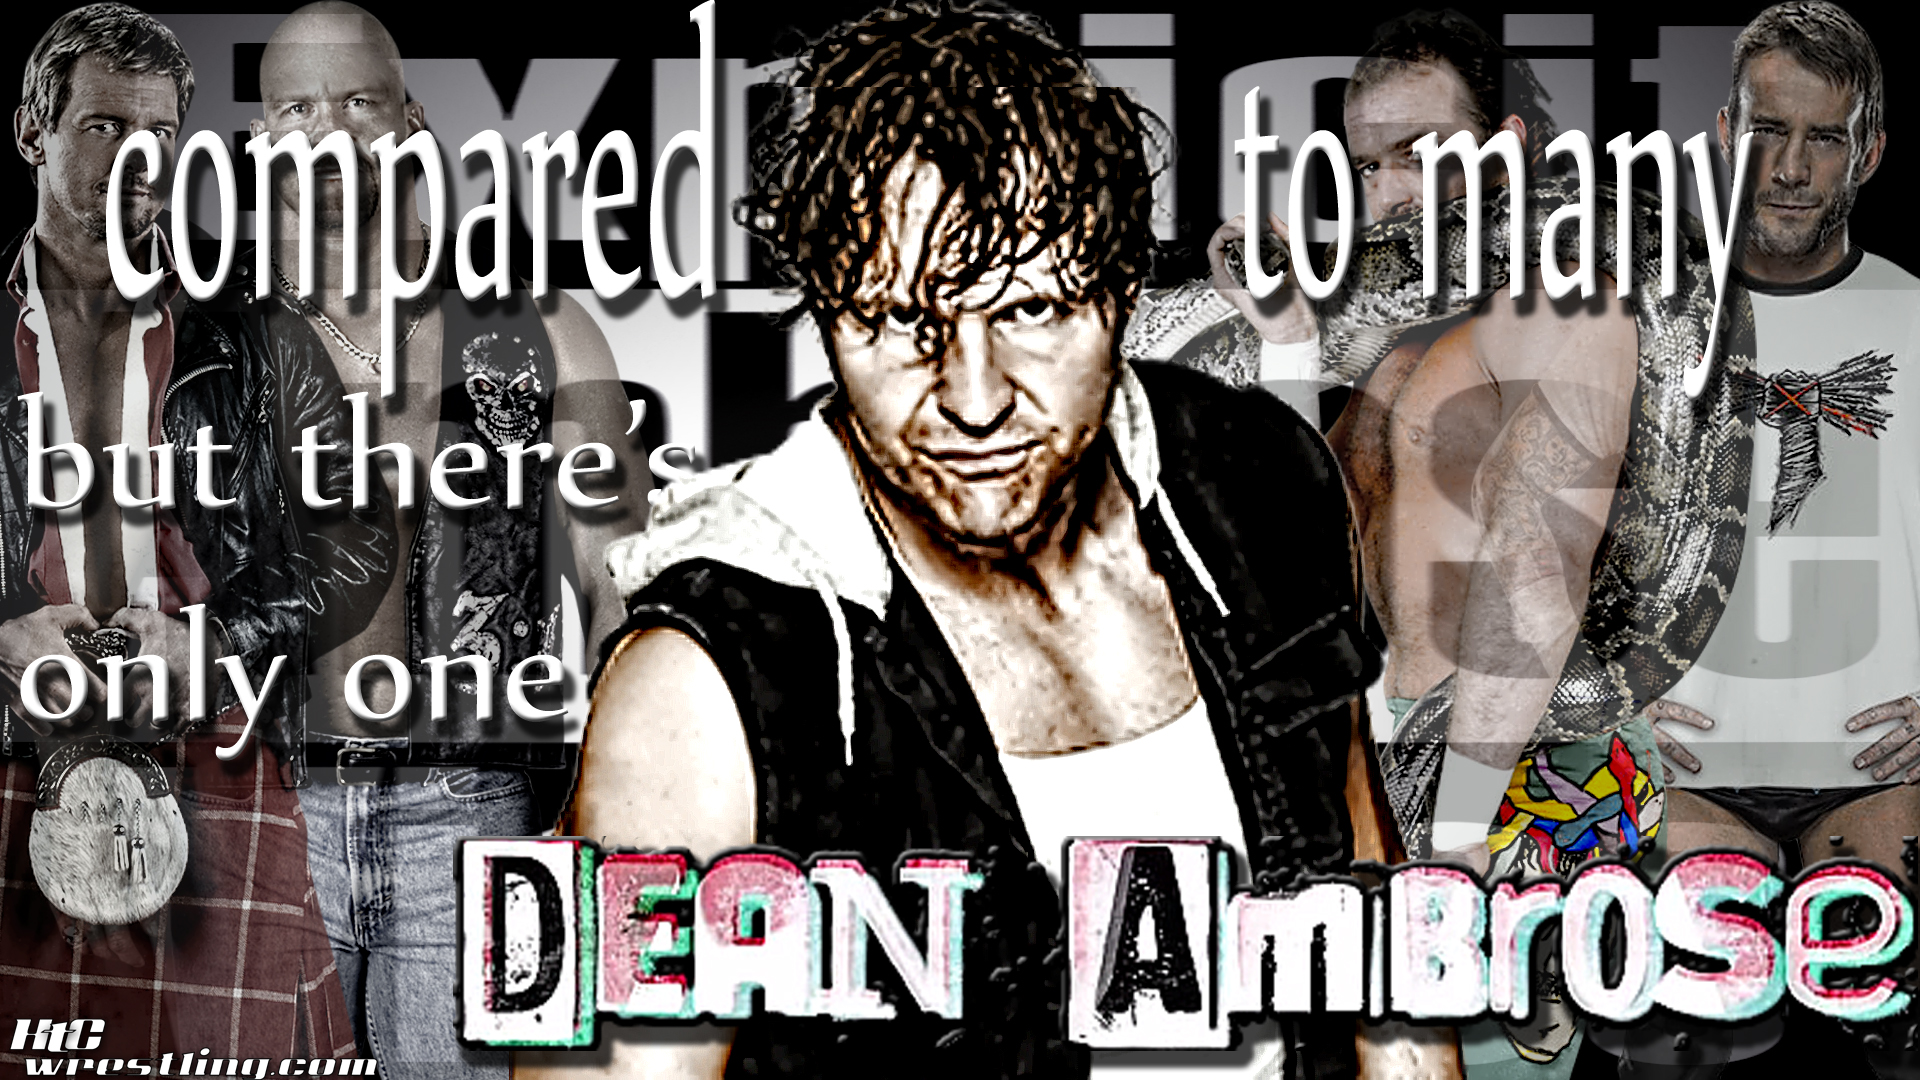 dean ambrose wallpaper,cool,font,photo caption,advertising,photography